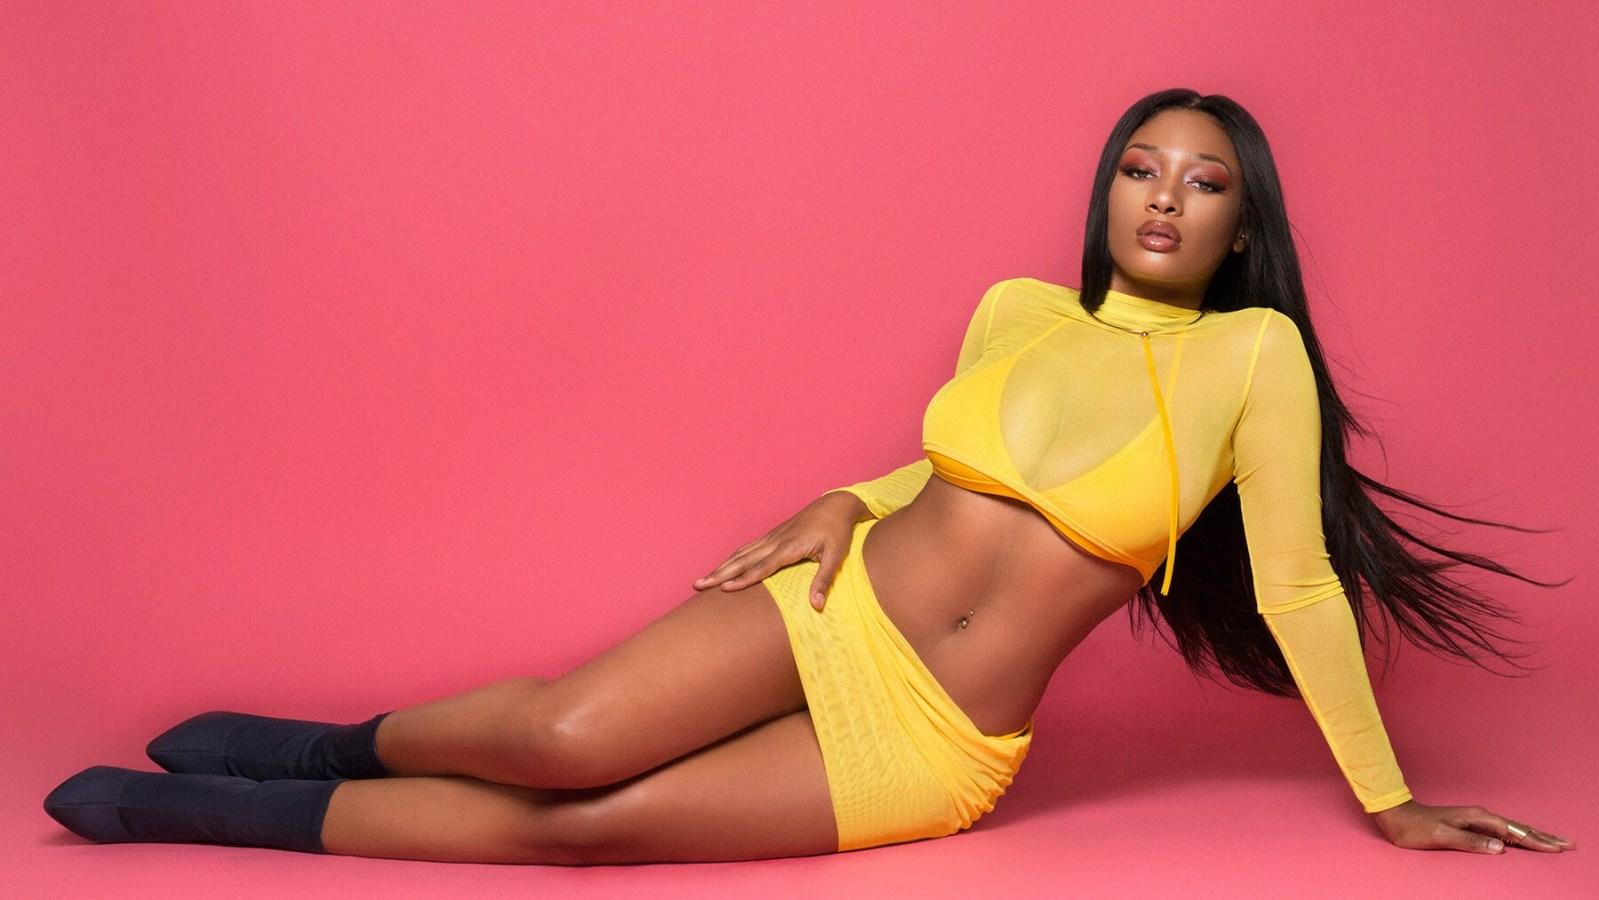 Apple Music Releases Up Next Music Doc With Megan Thee Stallion